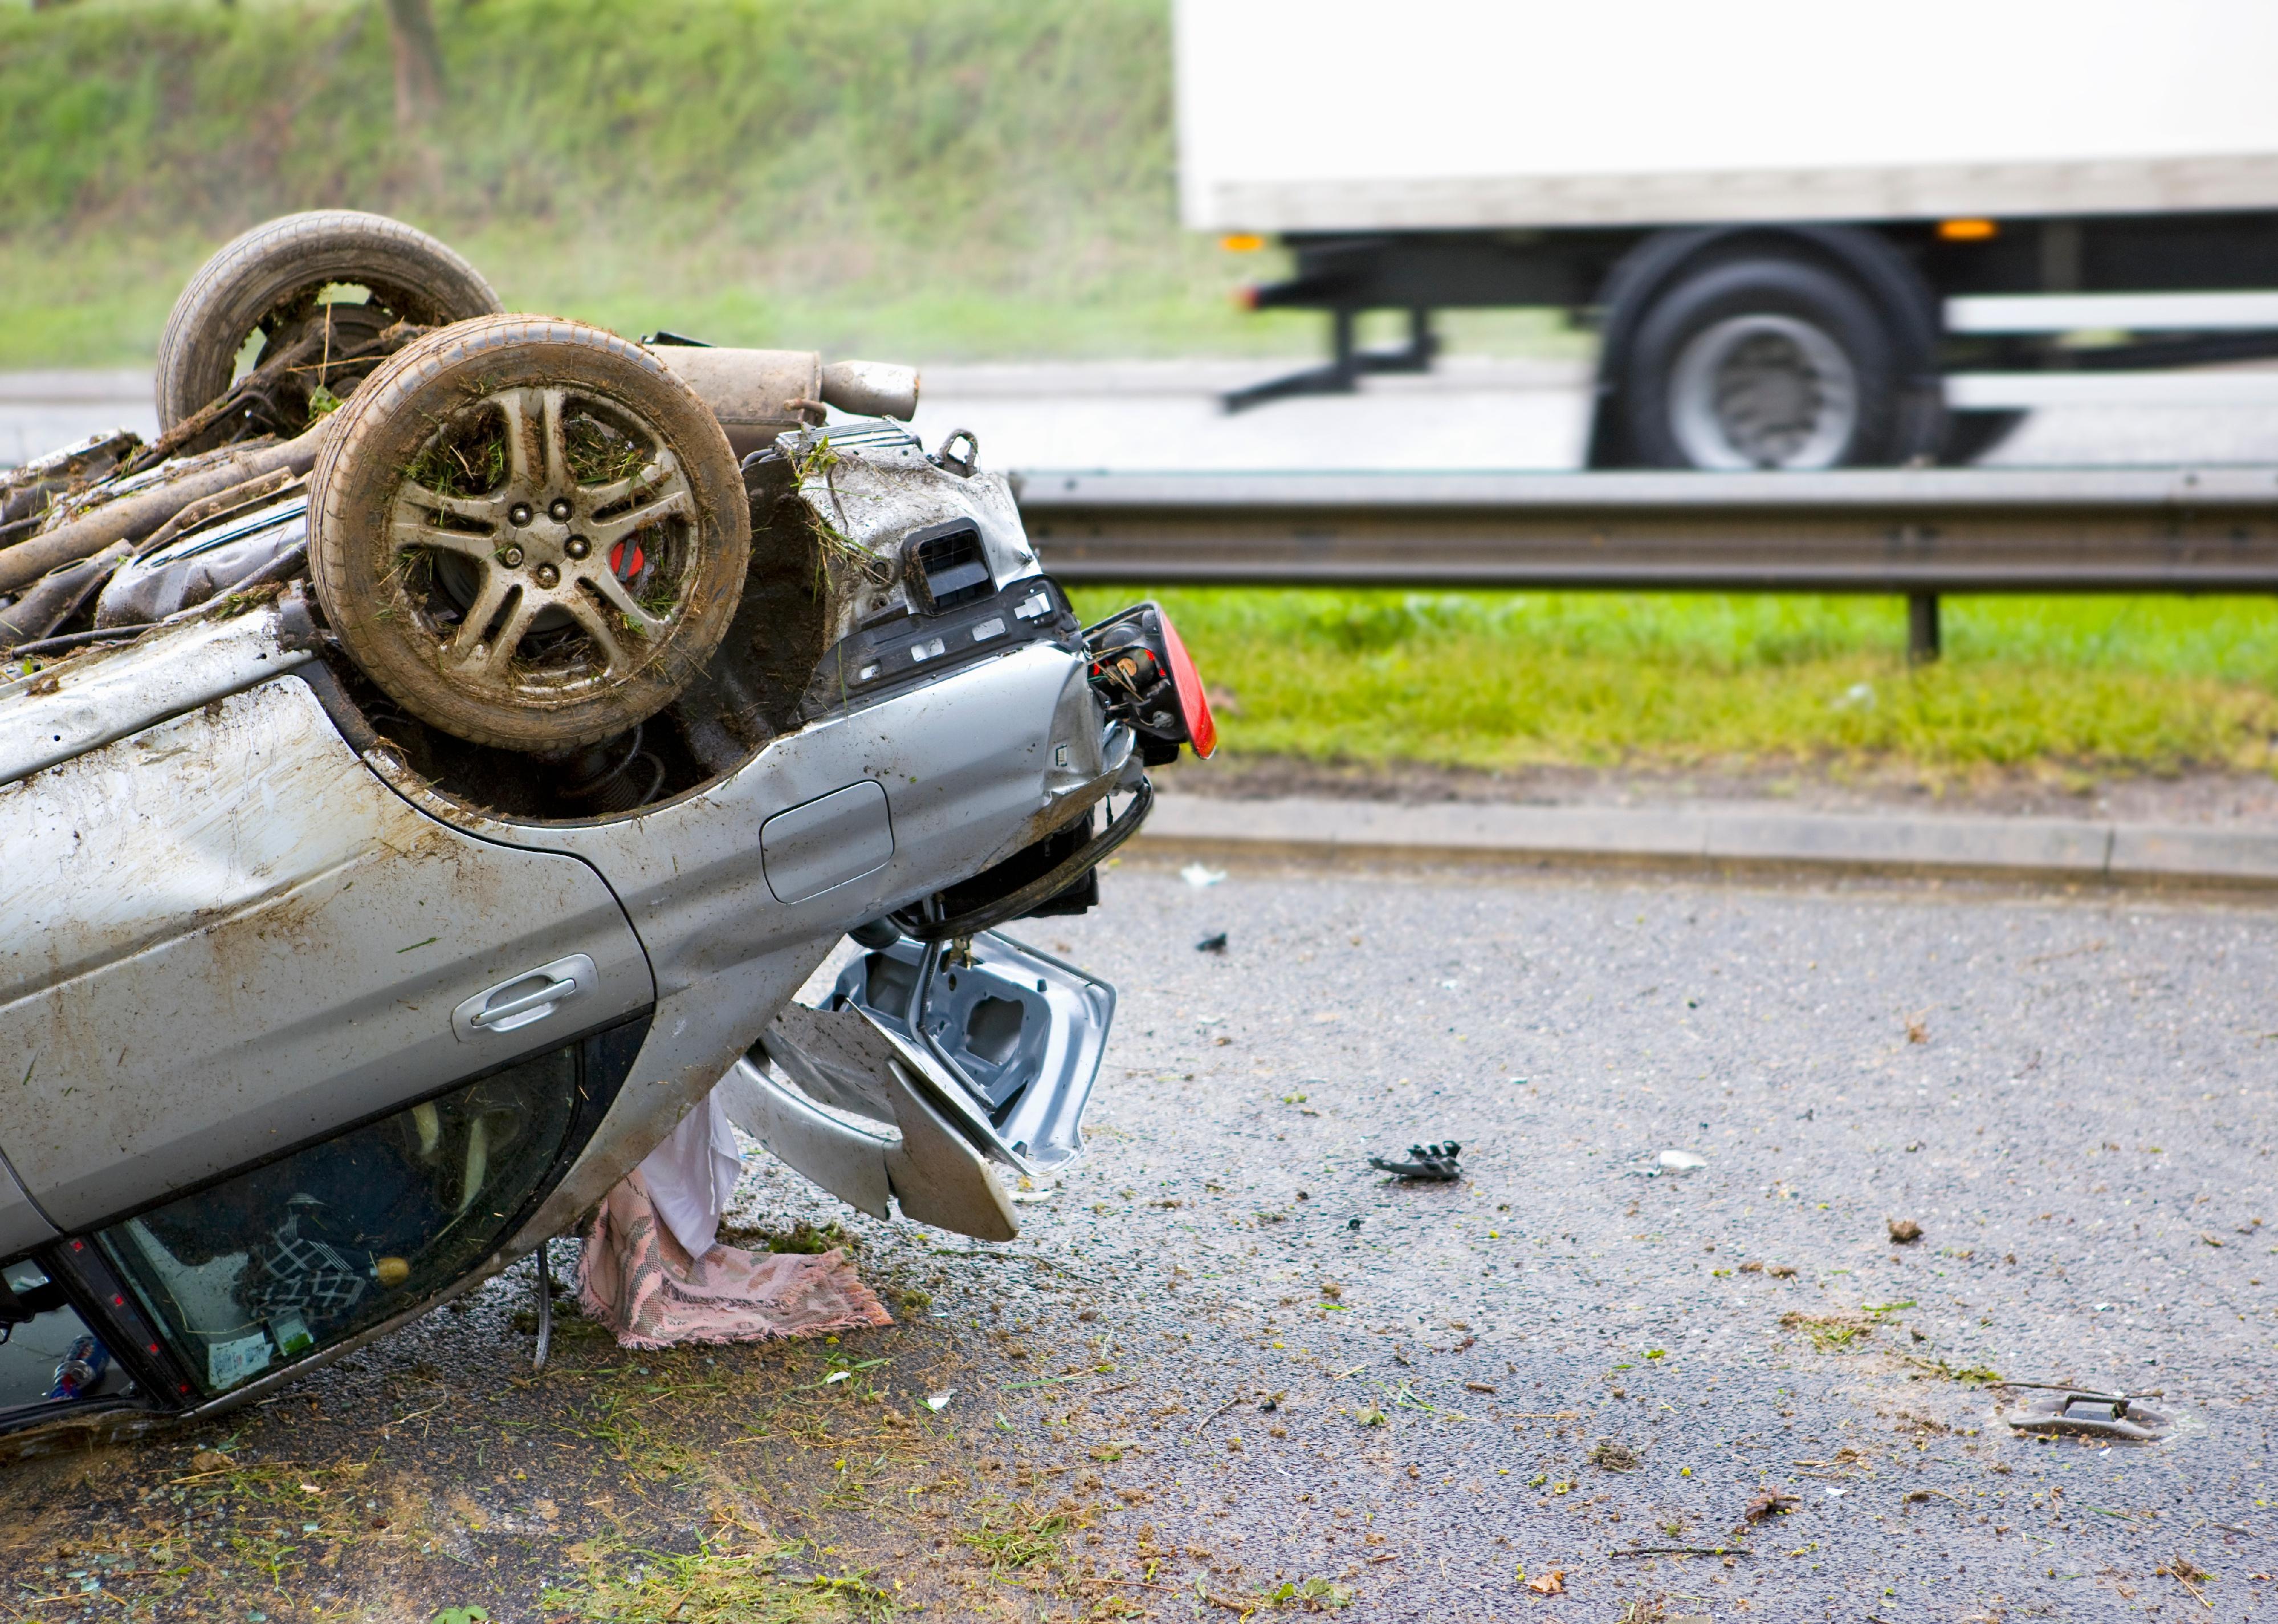 Close-up shot of the trunk of a car lying upside down after a crash on a motorway.